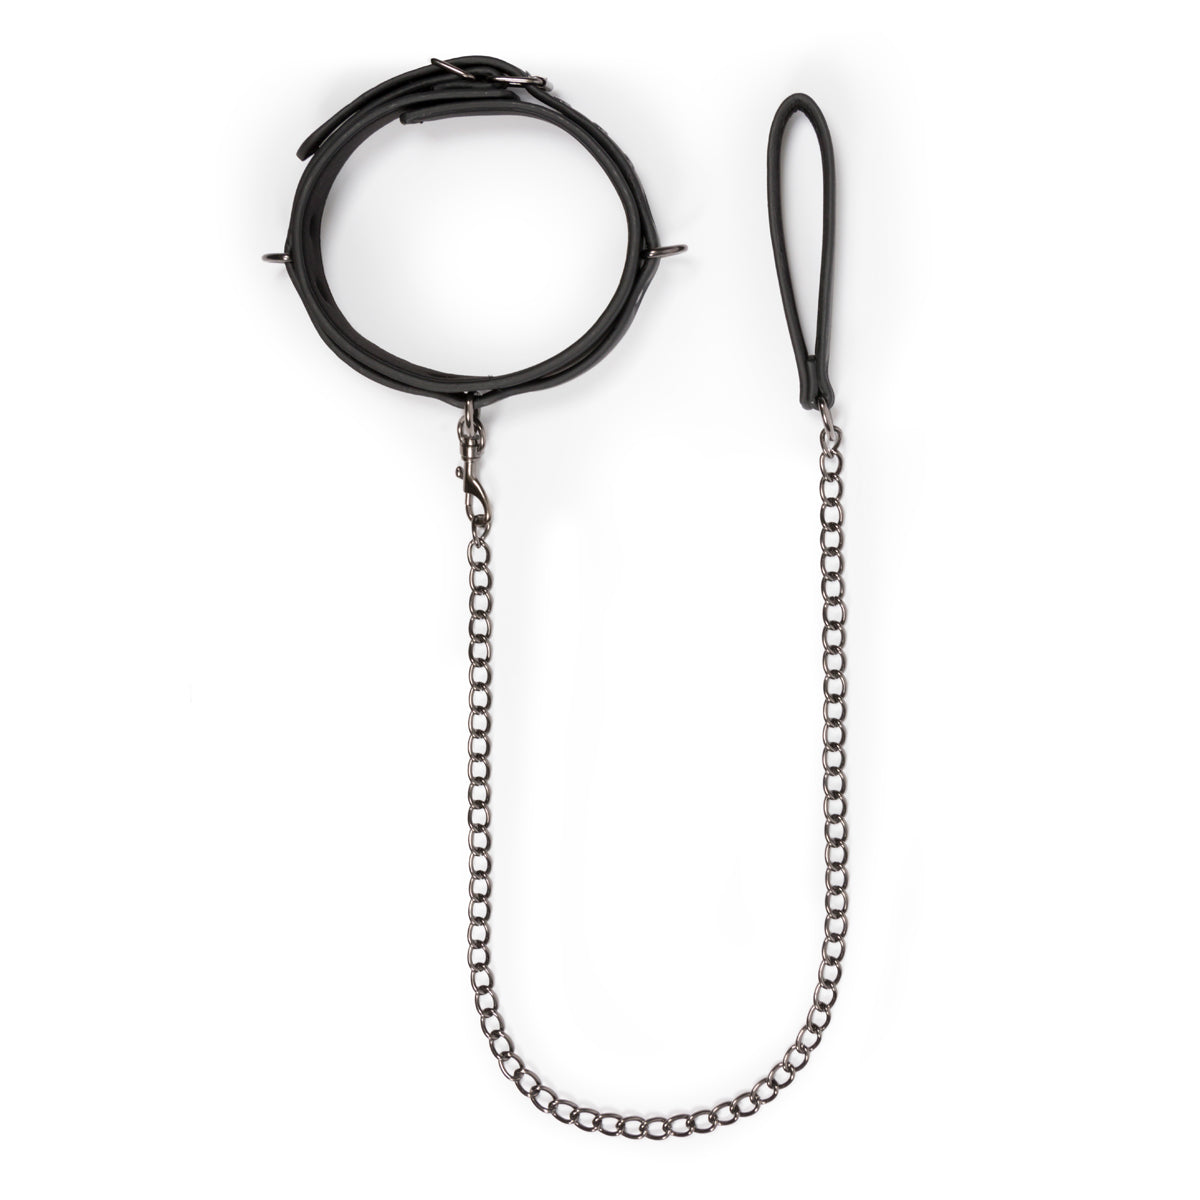 Fetish collar With Leash - Just for you desires